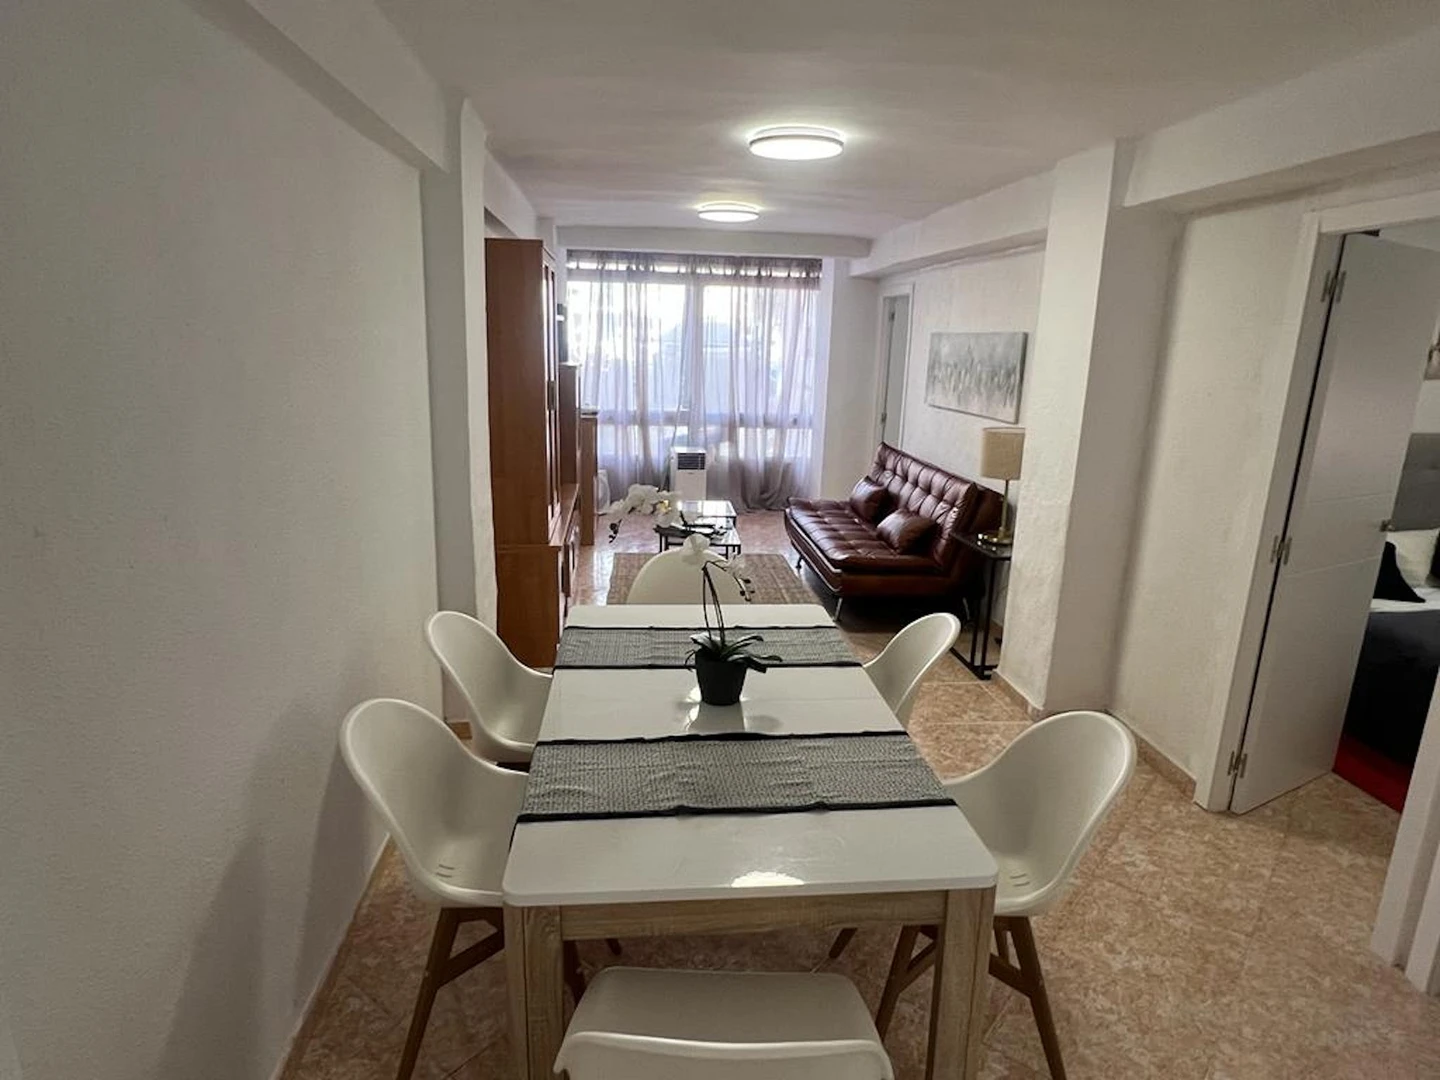 Room for rent in a shared flat in Malaga